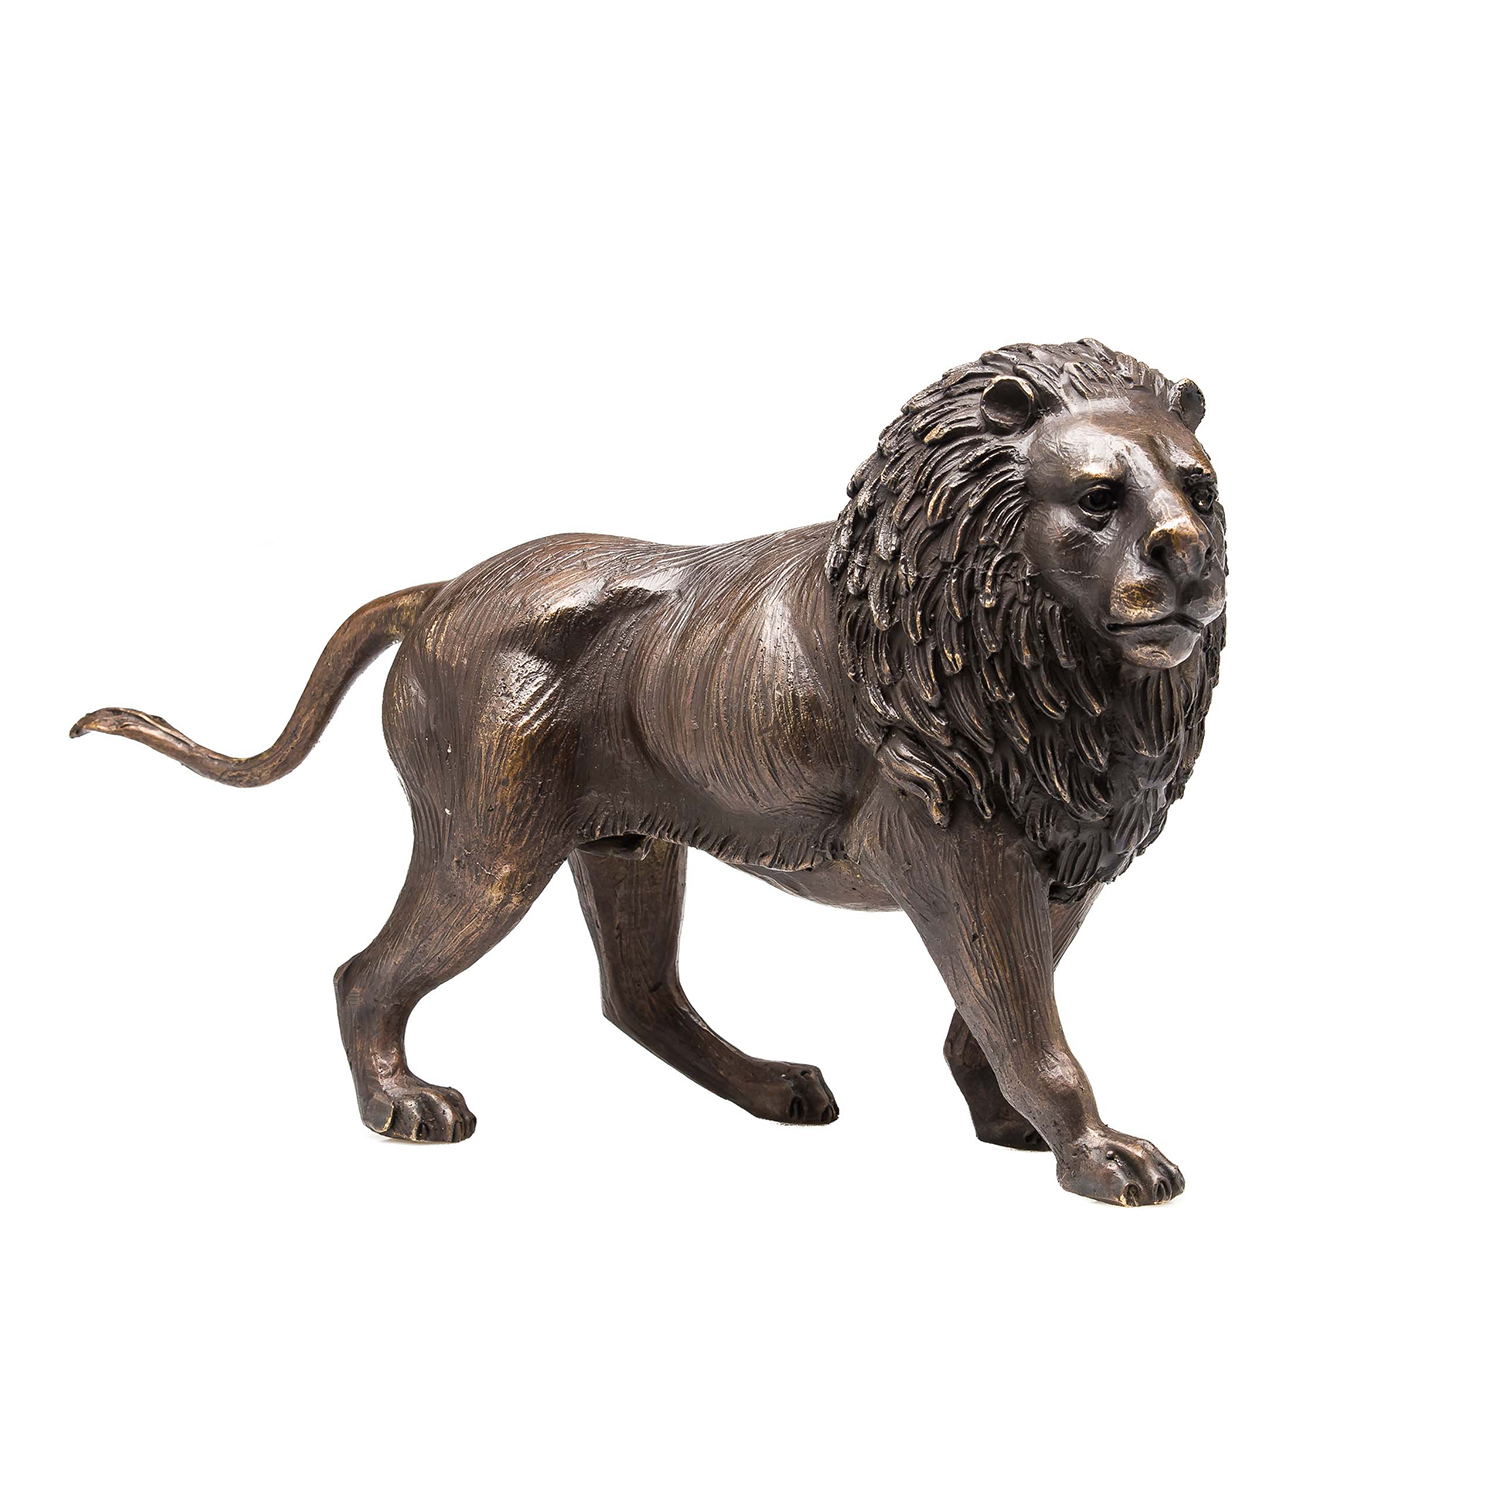 Lion Figurines for Sale